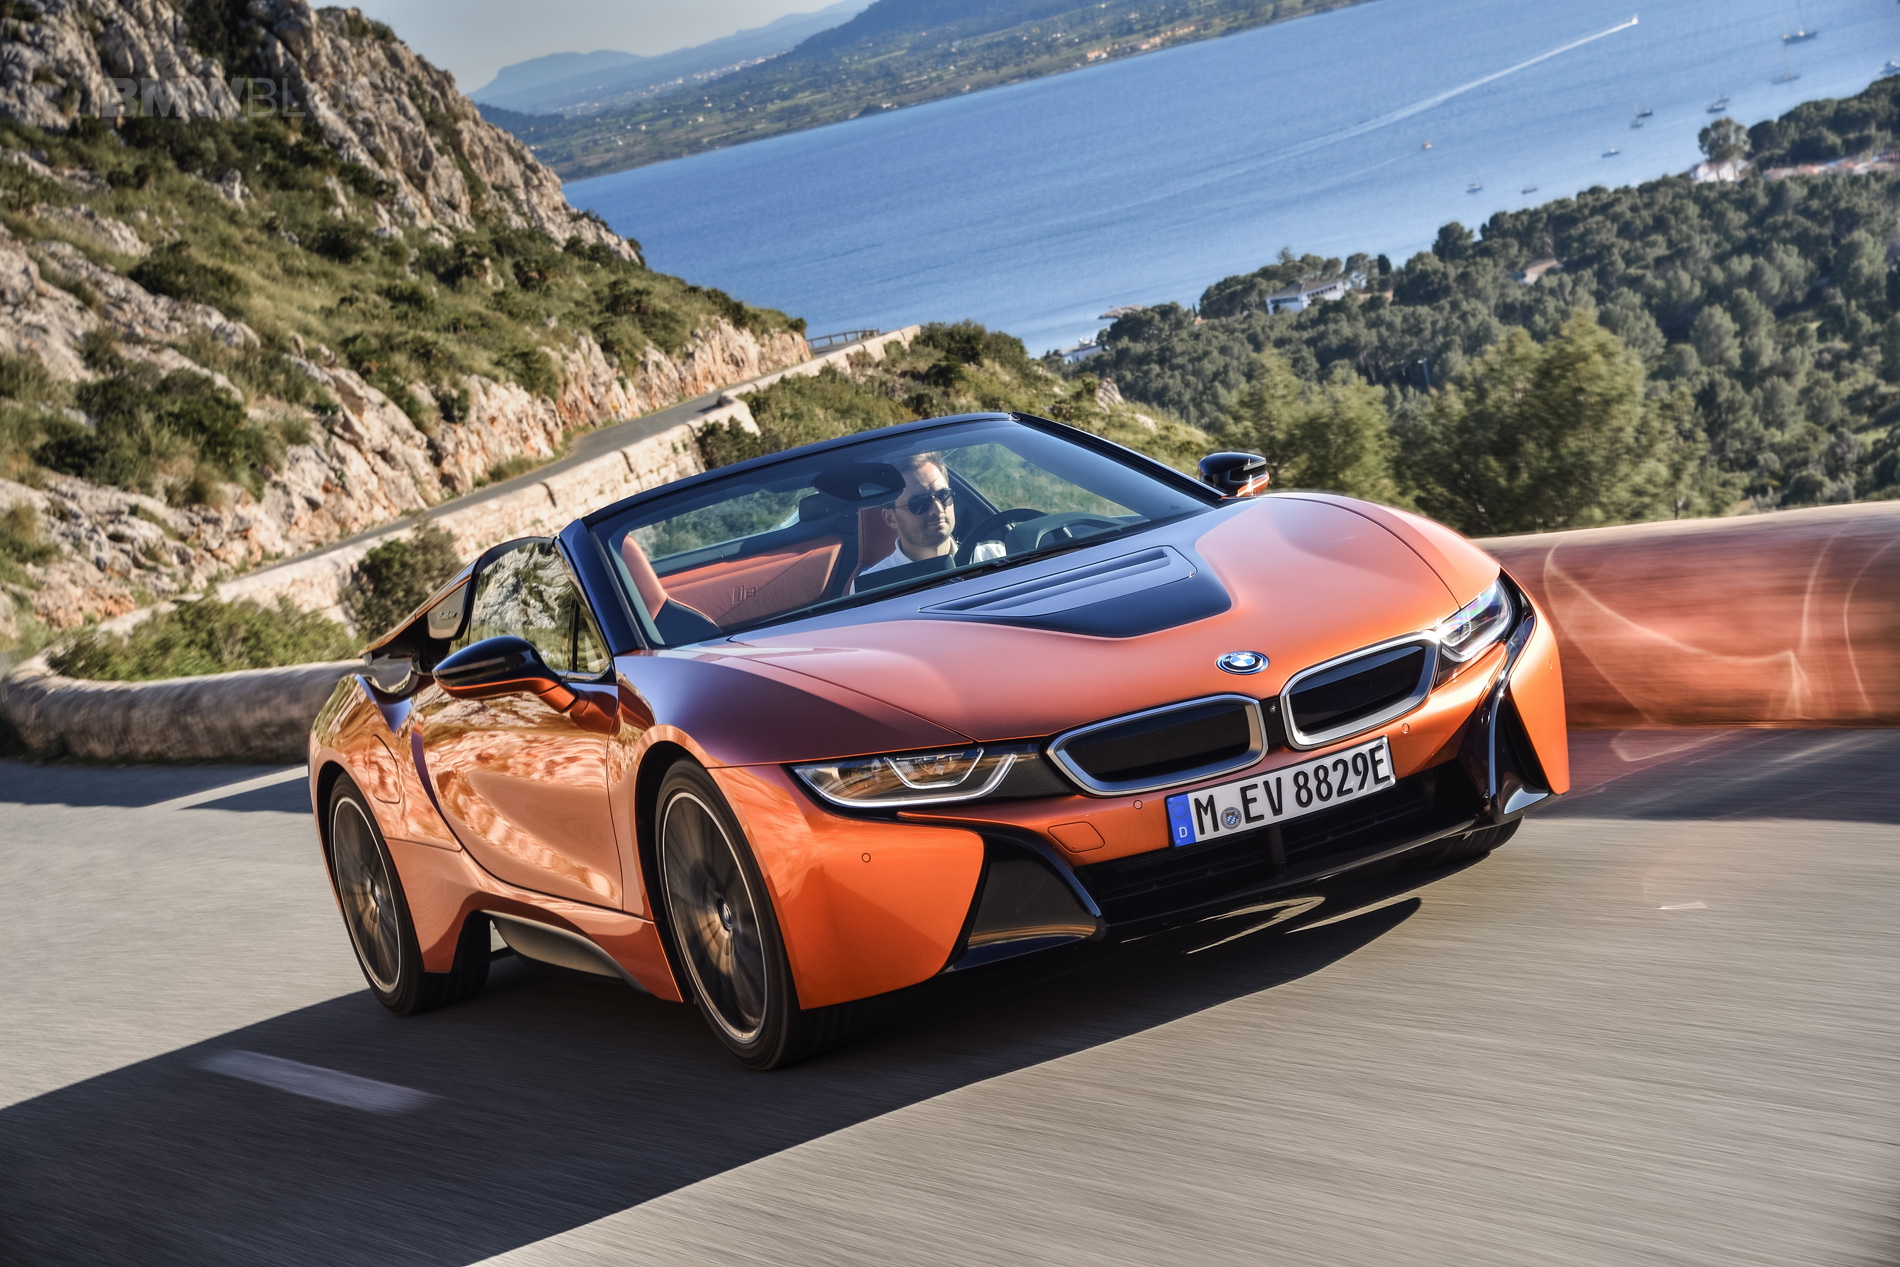 BMW i8 Roadster – The Modern Supercar And Future Icon